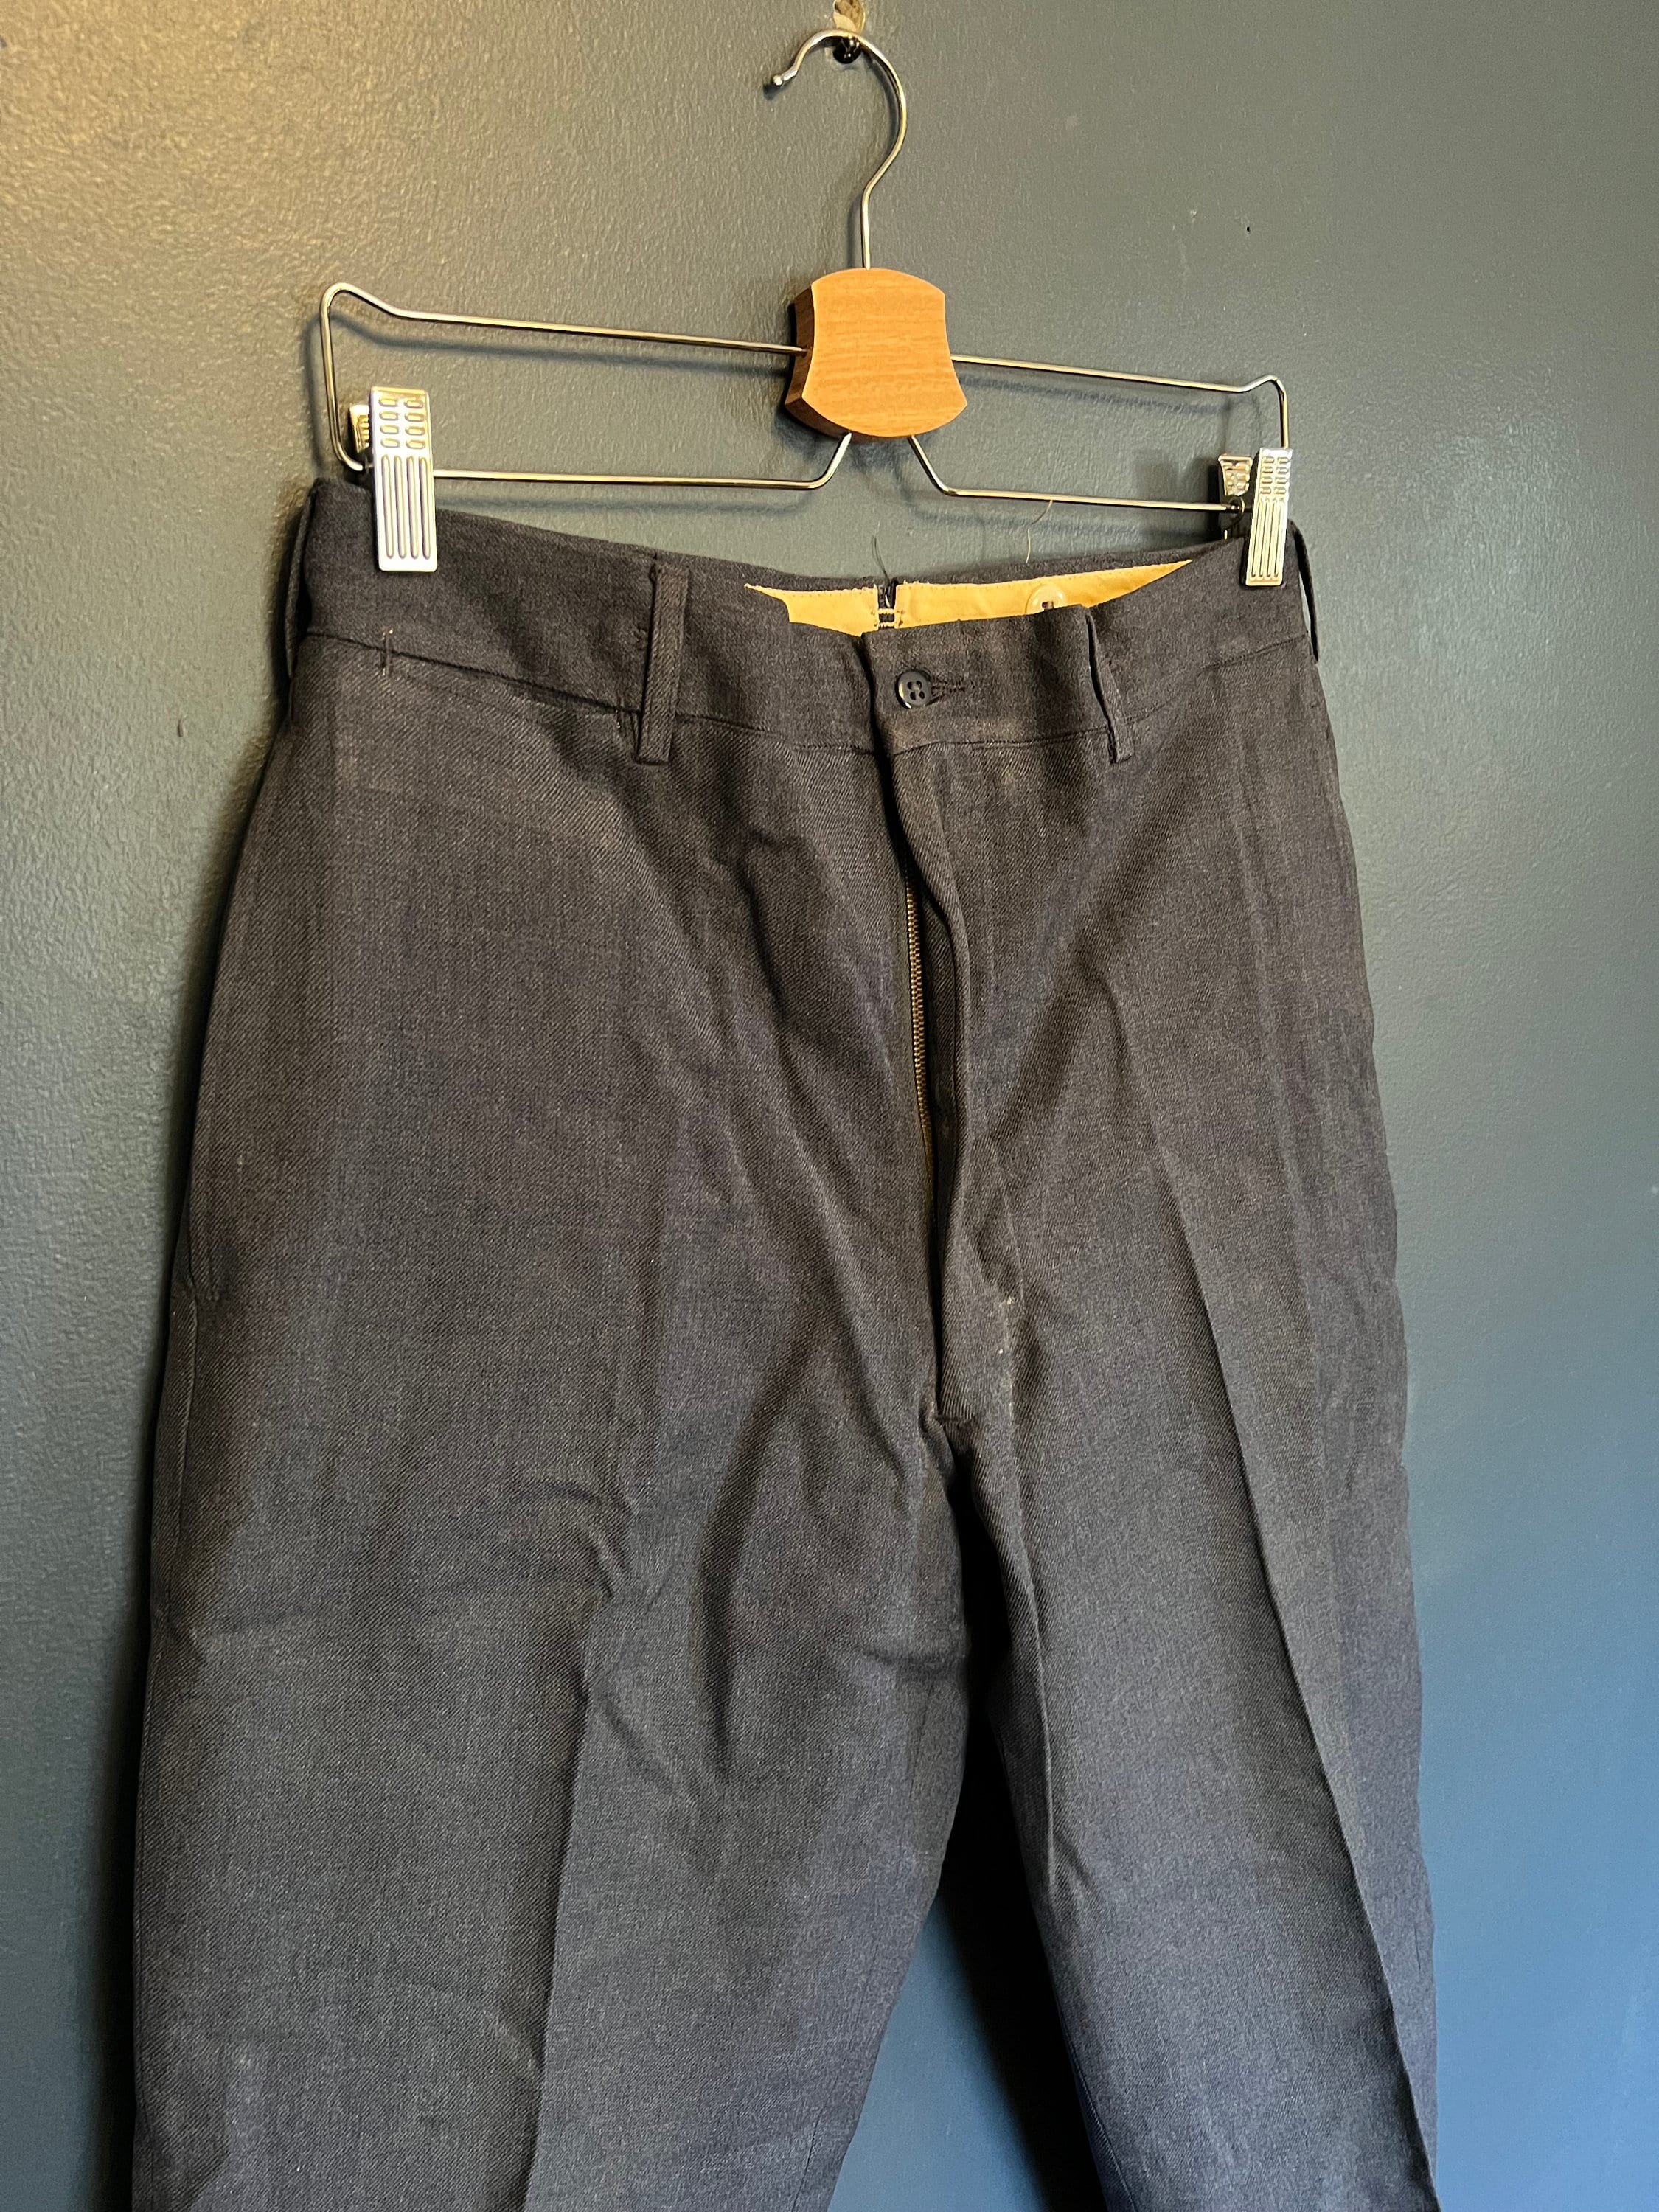 Vintage 40s US Army Wool Trousers Size 32/29 USA Made - Etsy Finland